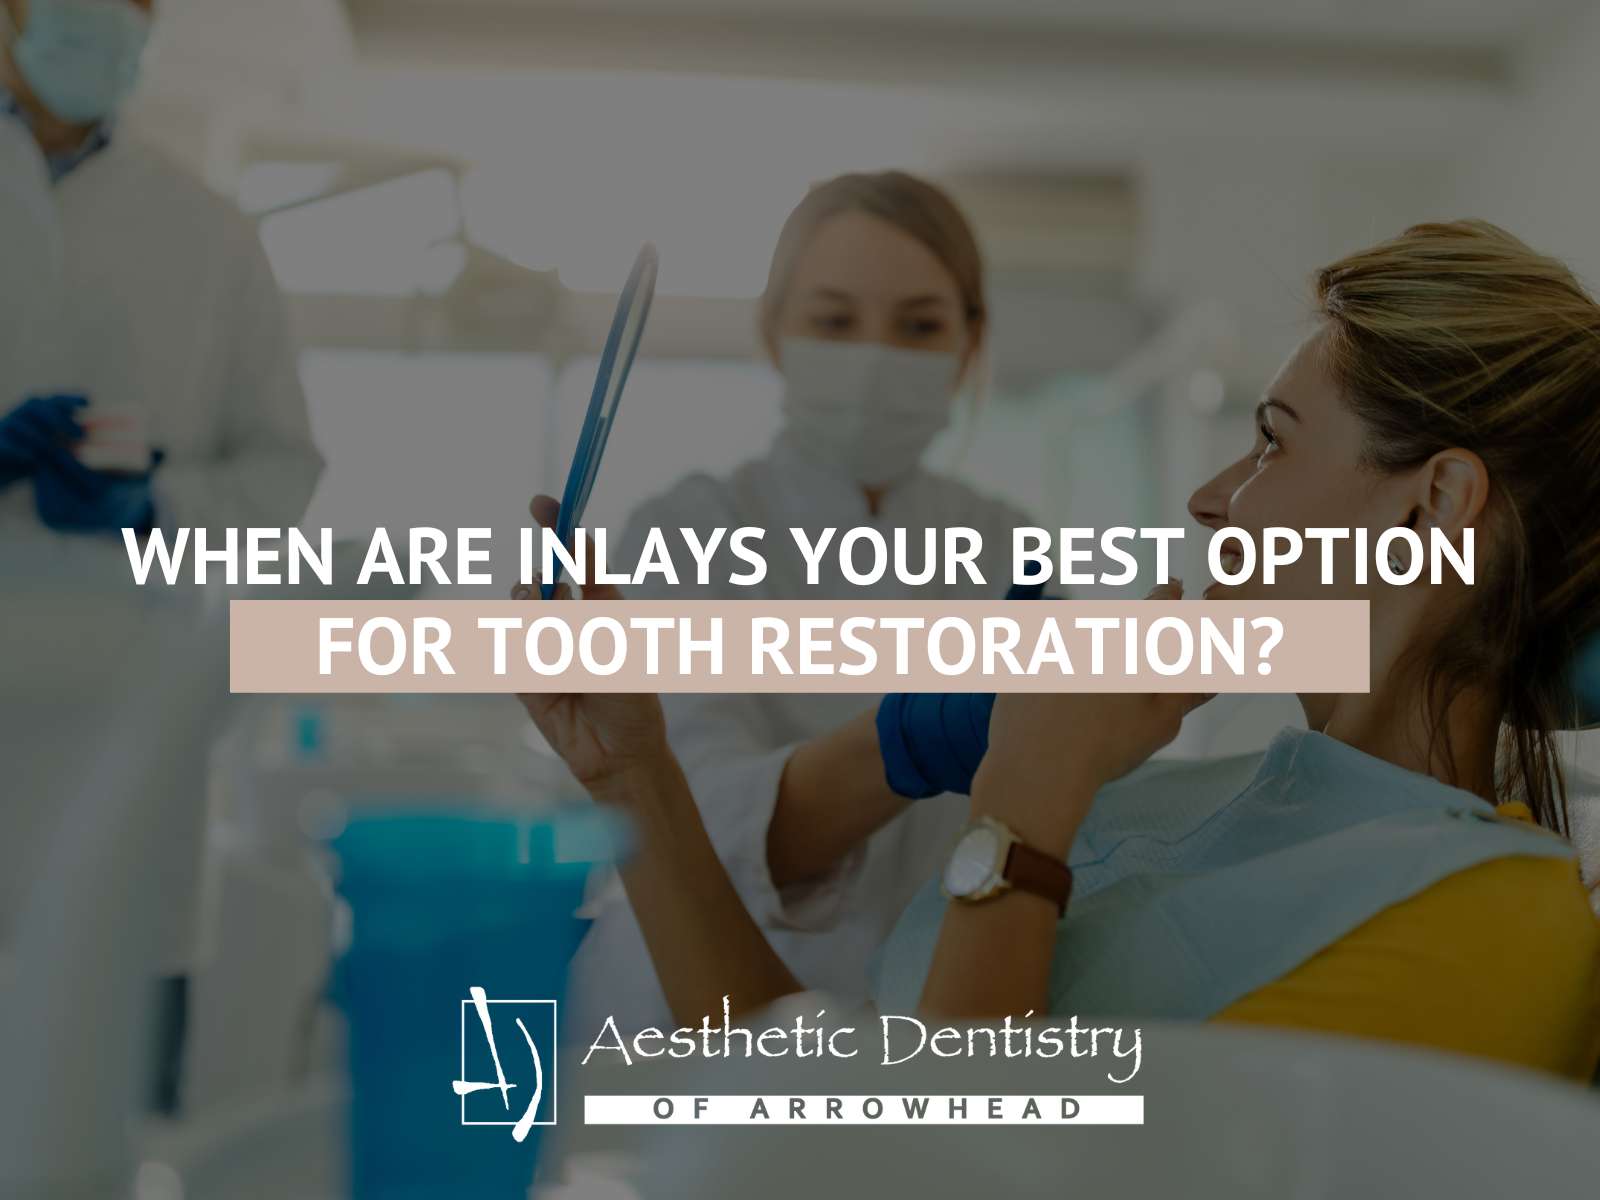 When Are Inlays Your Best Option For Tooth Restoration?